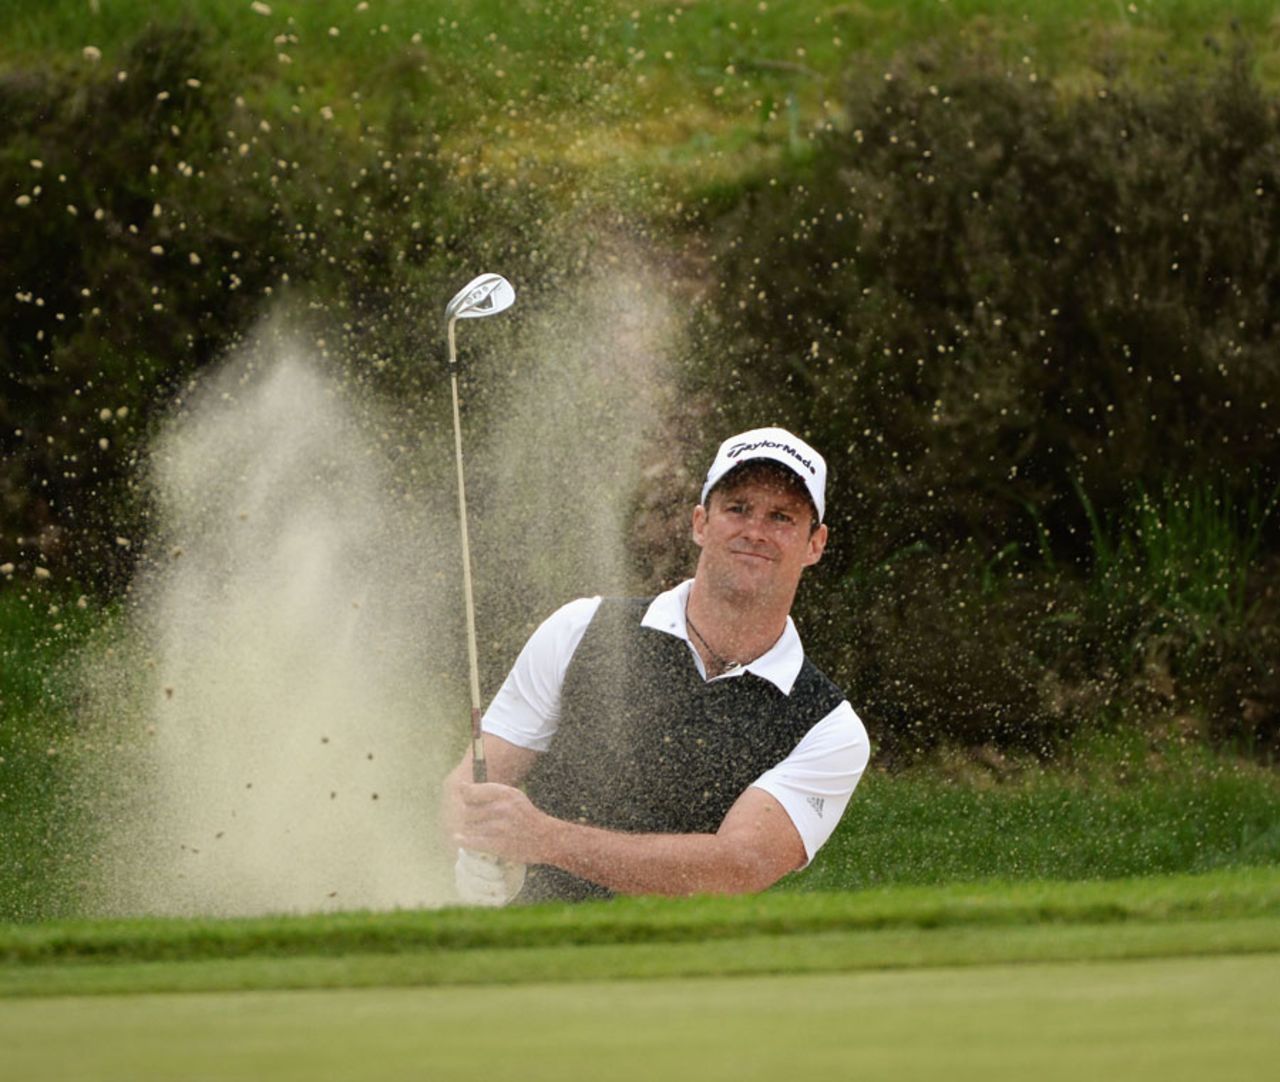 Former England captain Andrew Strauss plays out of a bunker at Wentworth, BMW Championships, Wentworth, May, 22, 2013